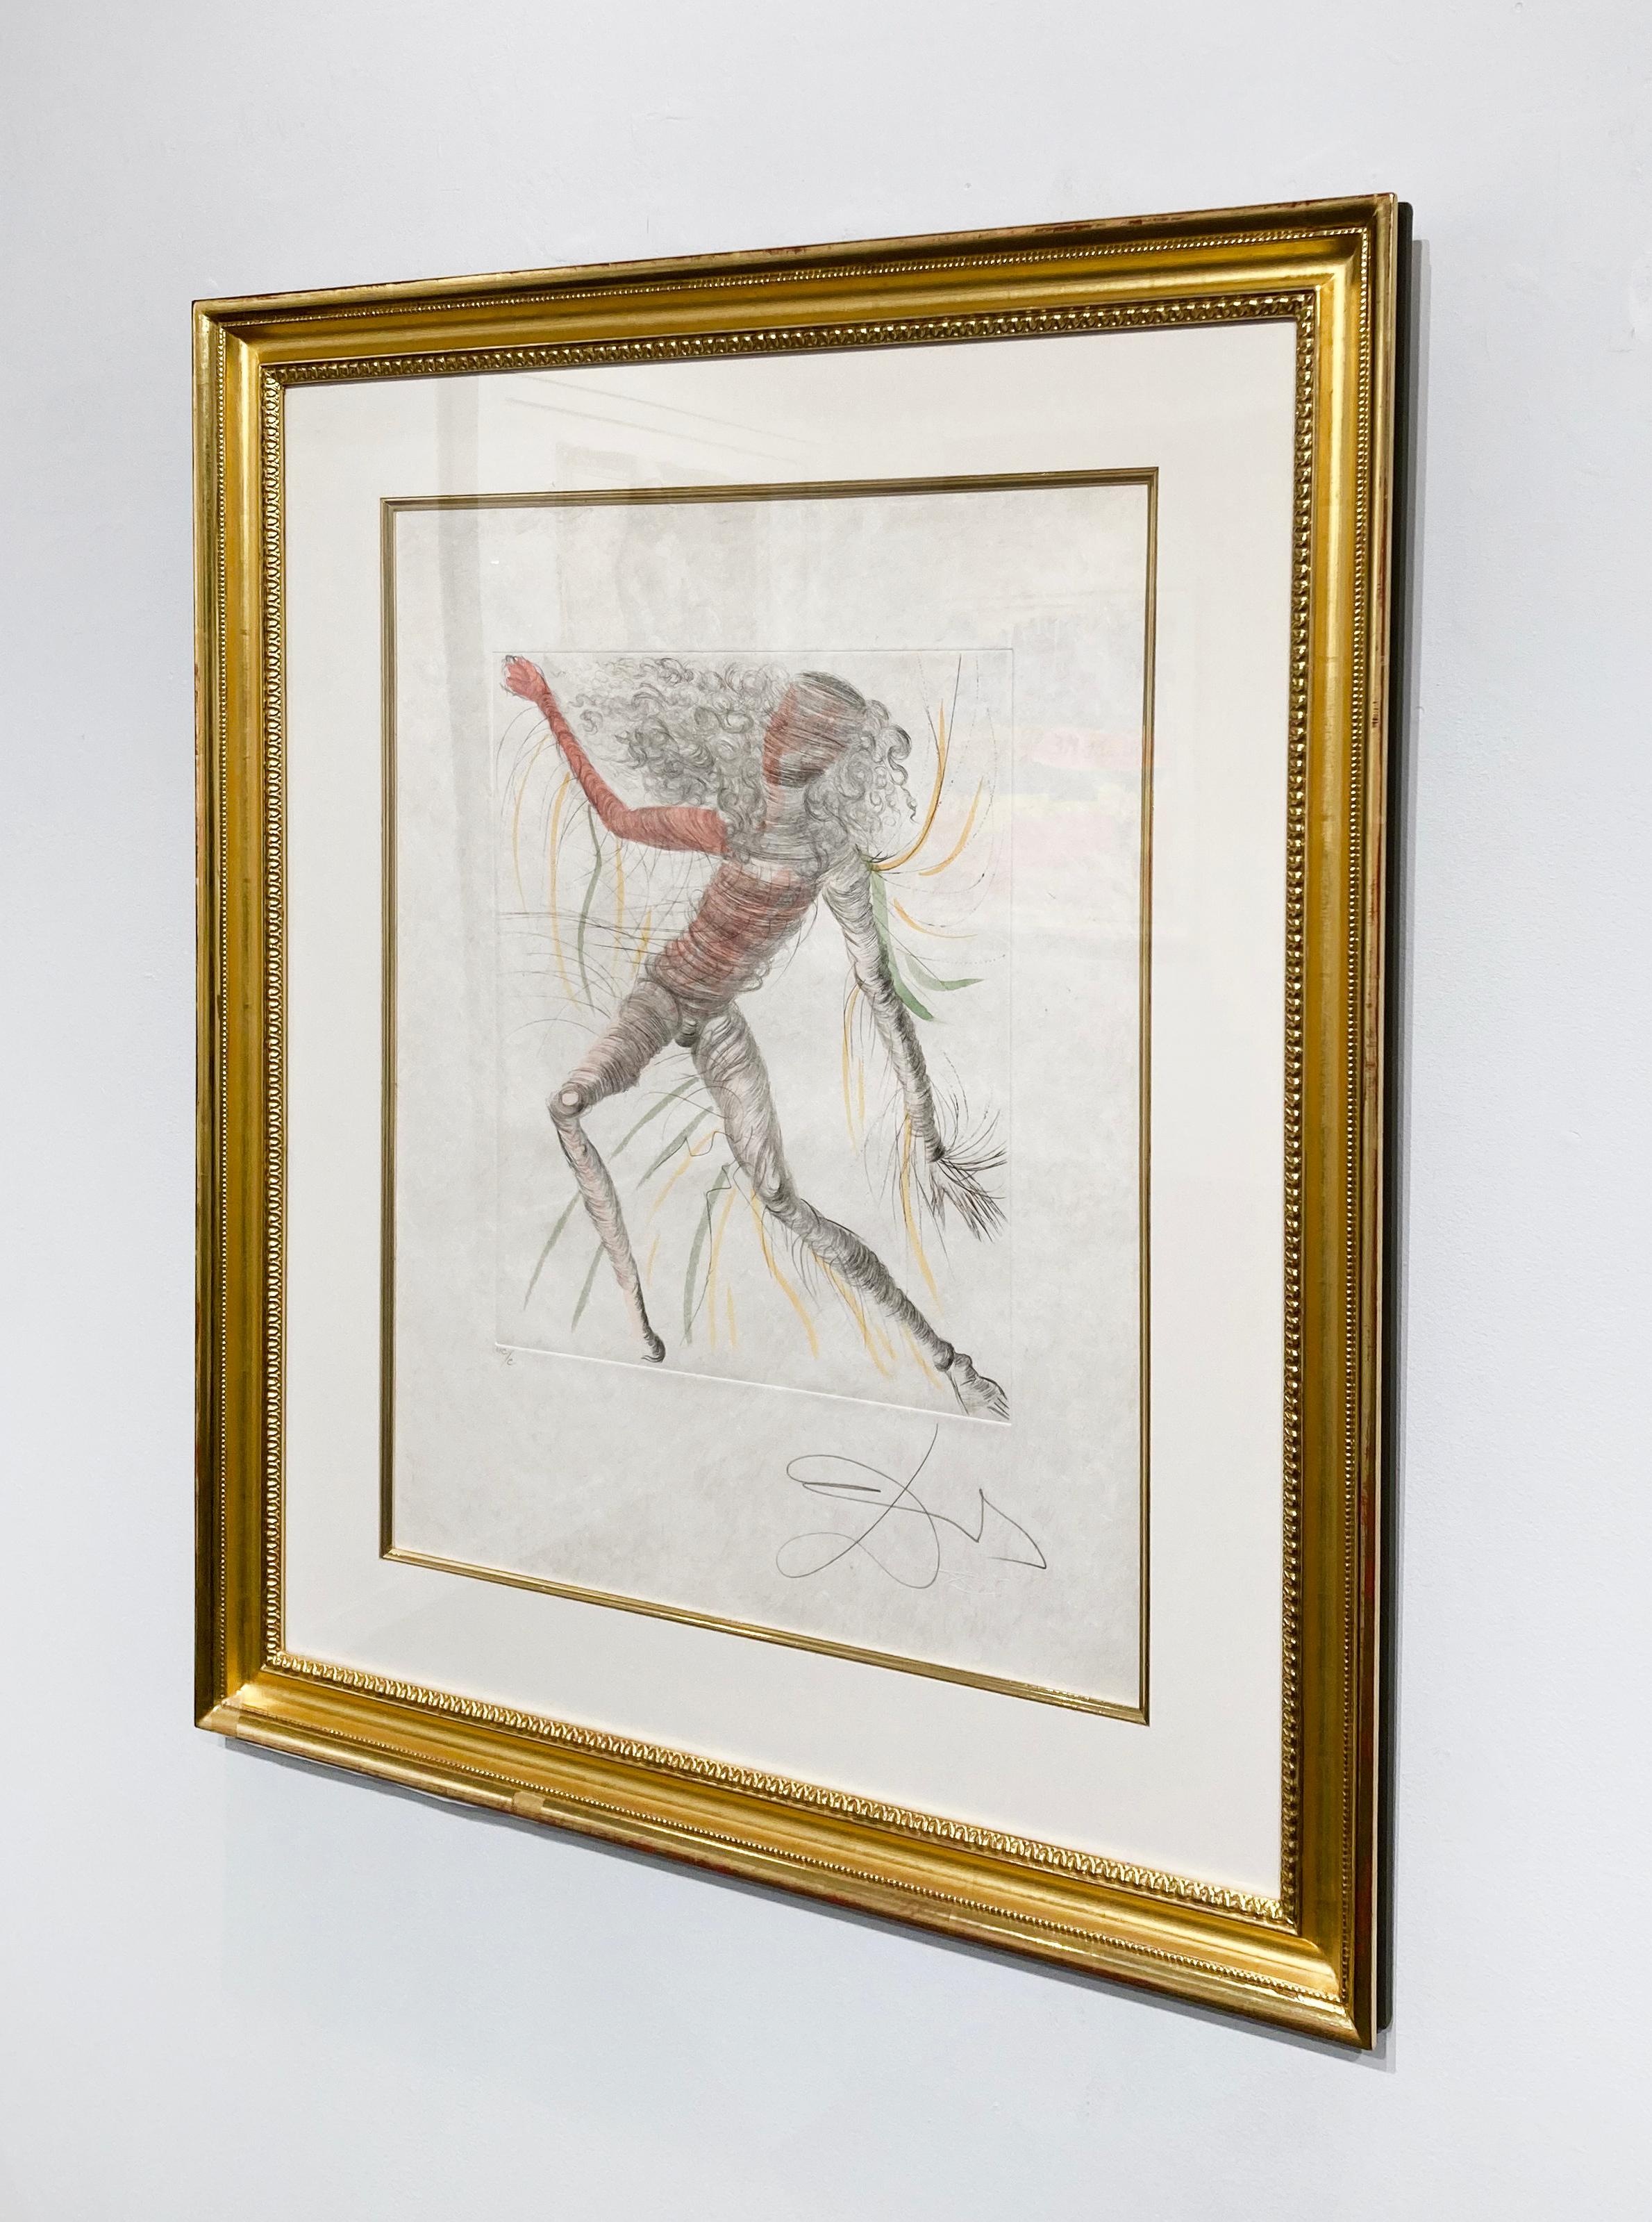 Artist:  Dali, Salvador
Title:  The Cosmonaut
Series:  The Hippies
Date:  1969
Medium:  drypoint with added color
Framed Dimensions:  34